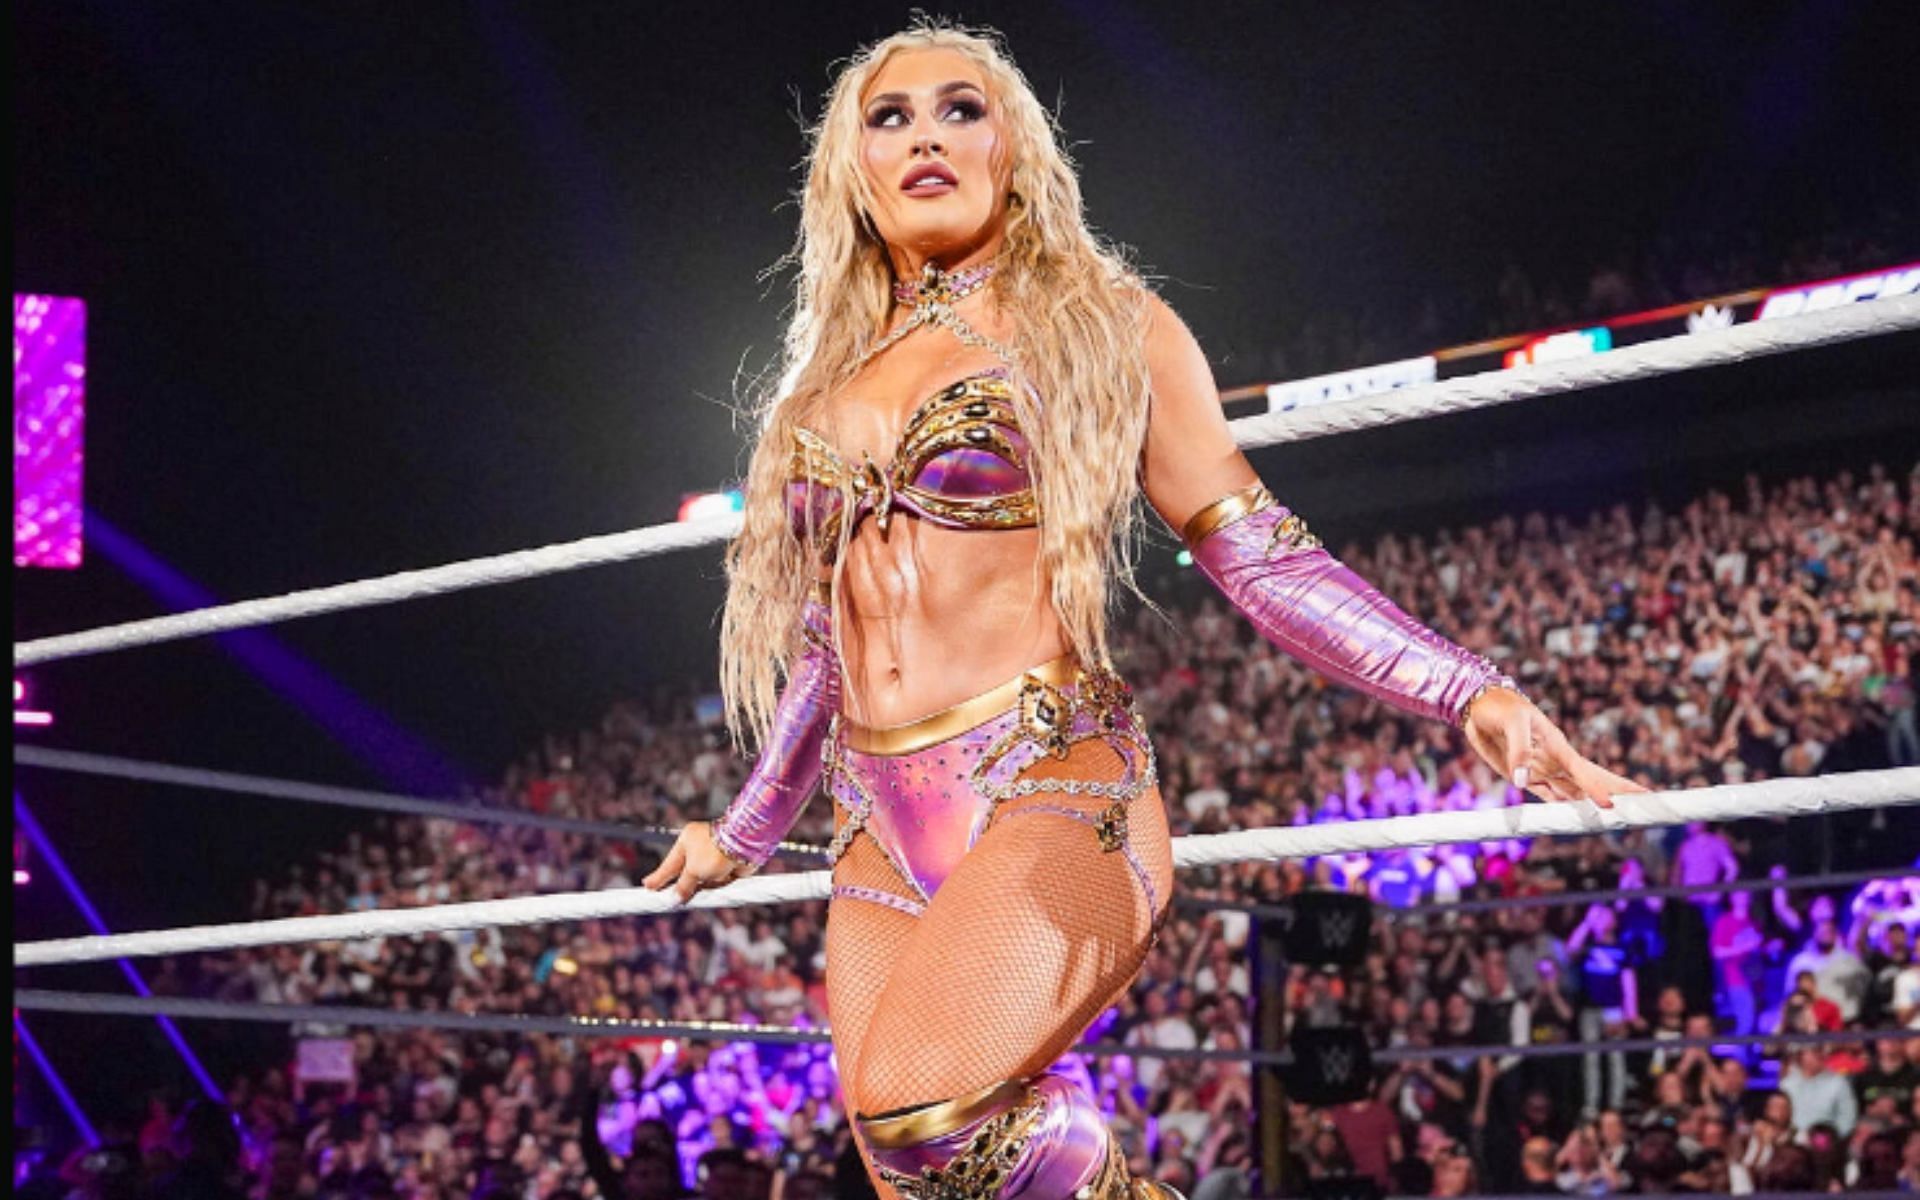 Tiffany Stratton is on an impressionable run on SmackDown (Image source: WWE)